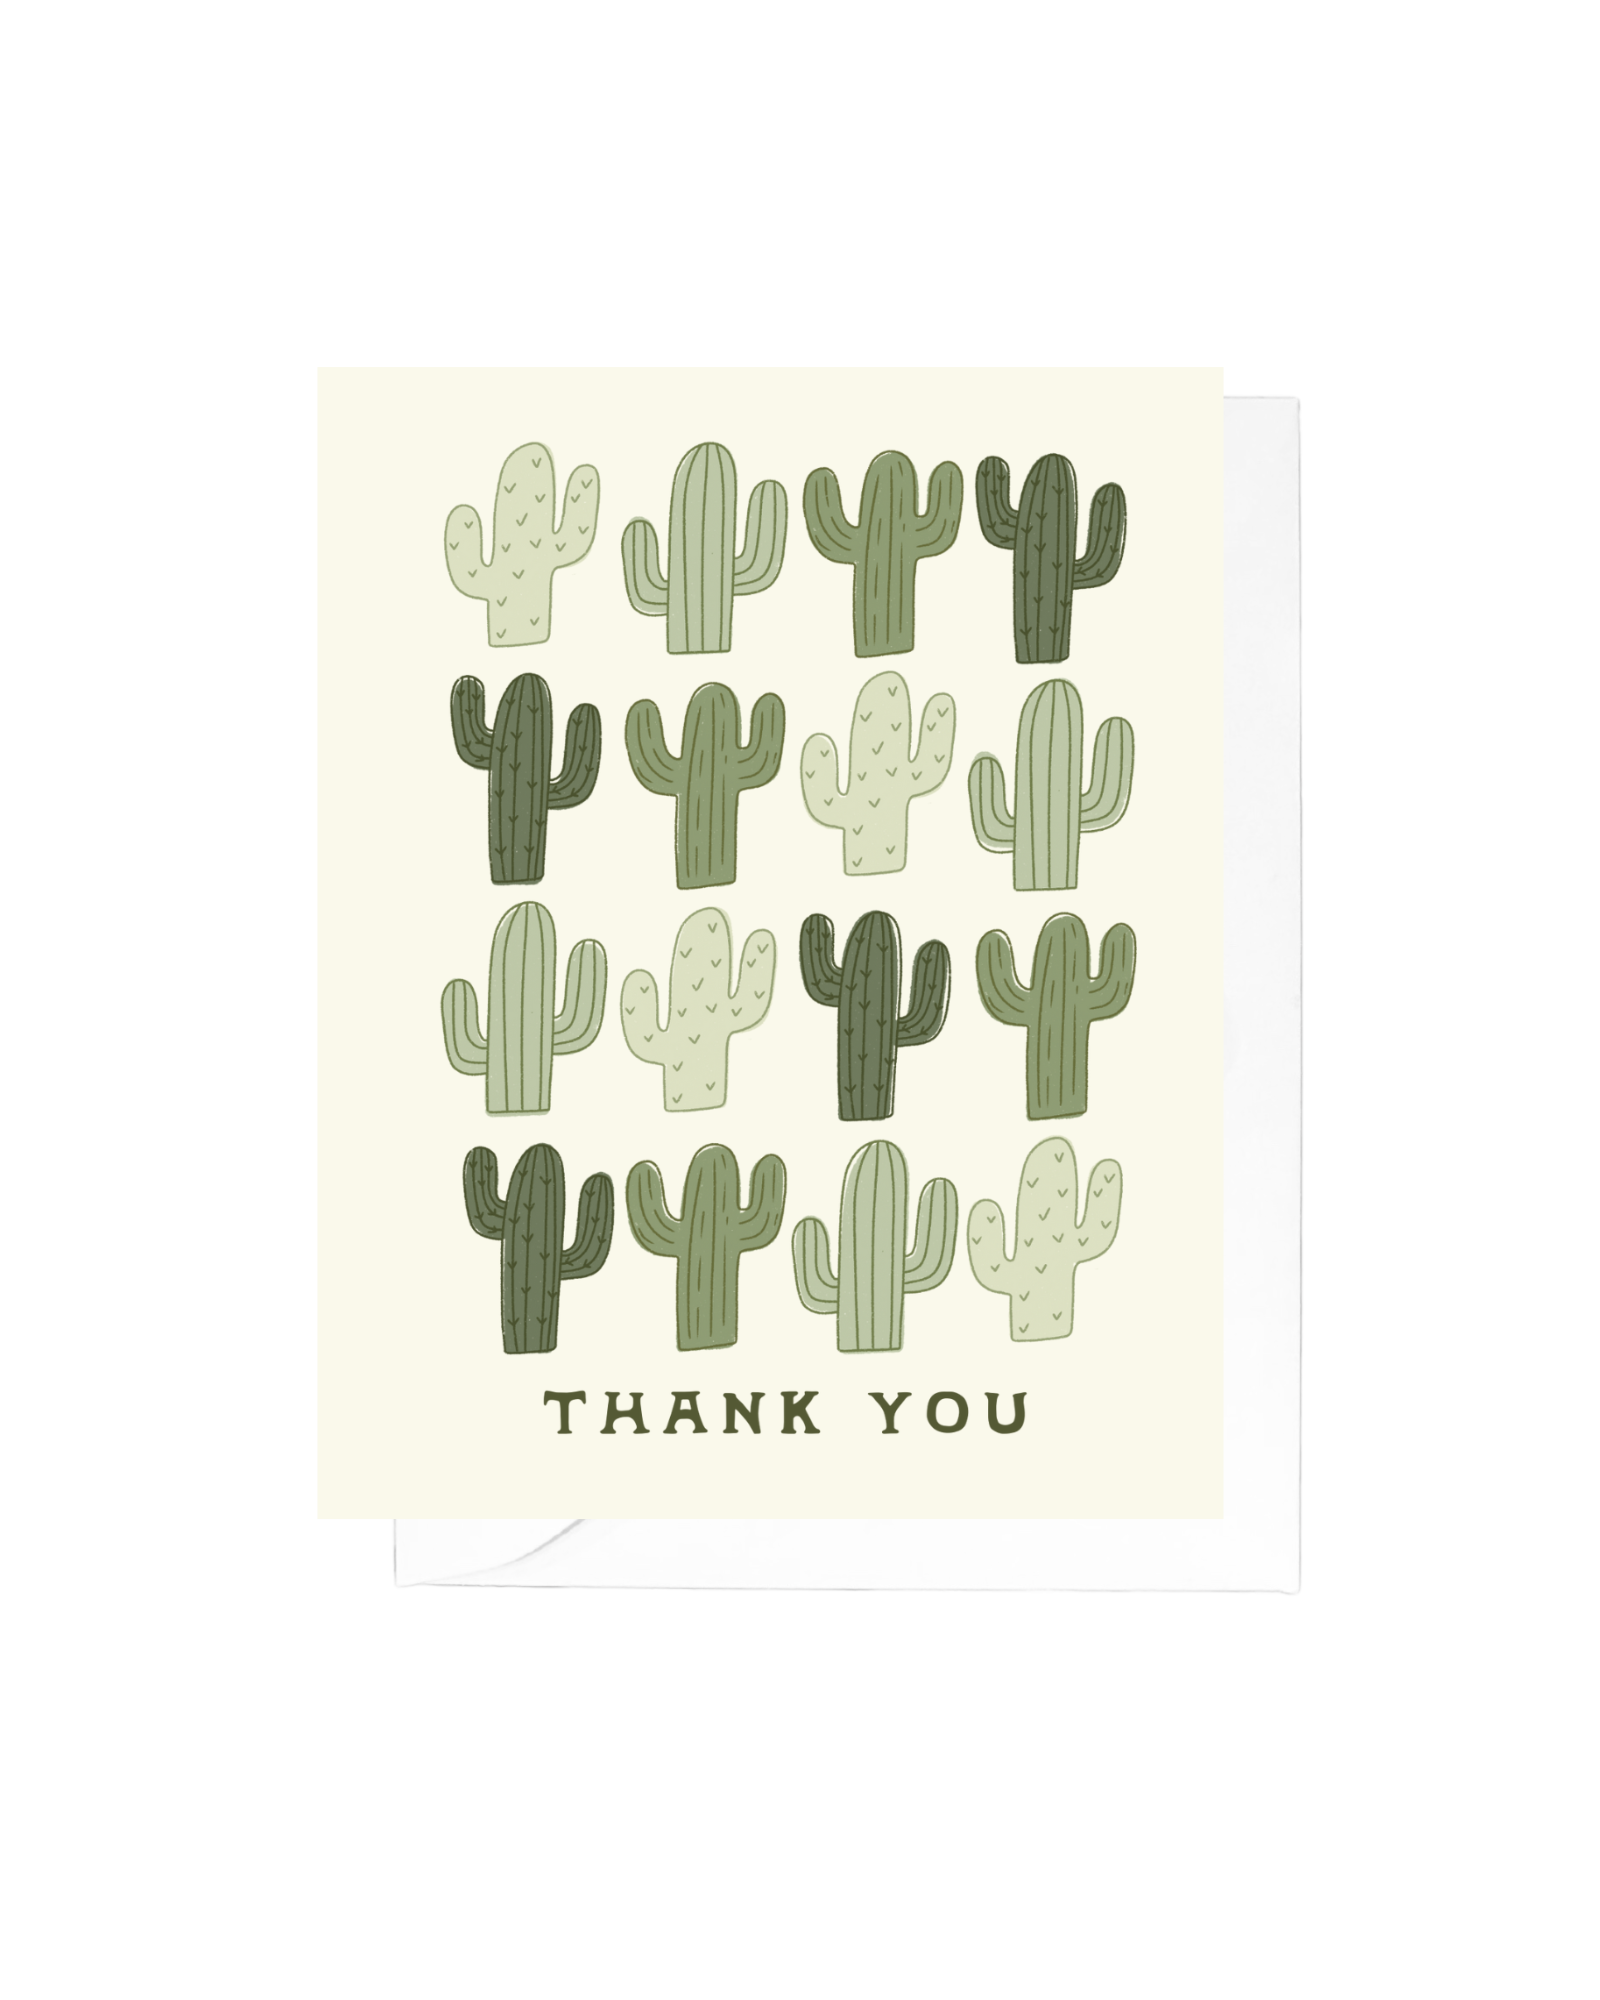 Light green greeting card with 16 saguaros in different shades of green with the words "thank you" bottom center